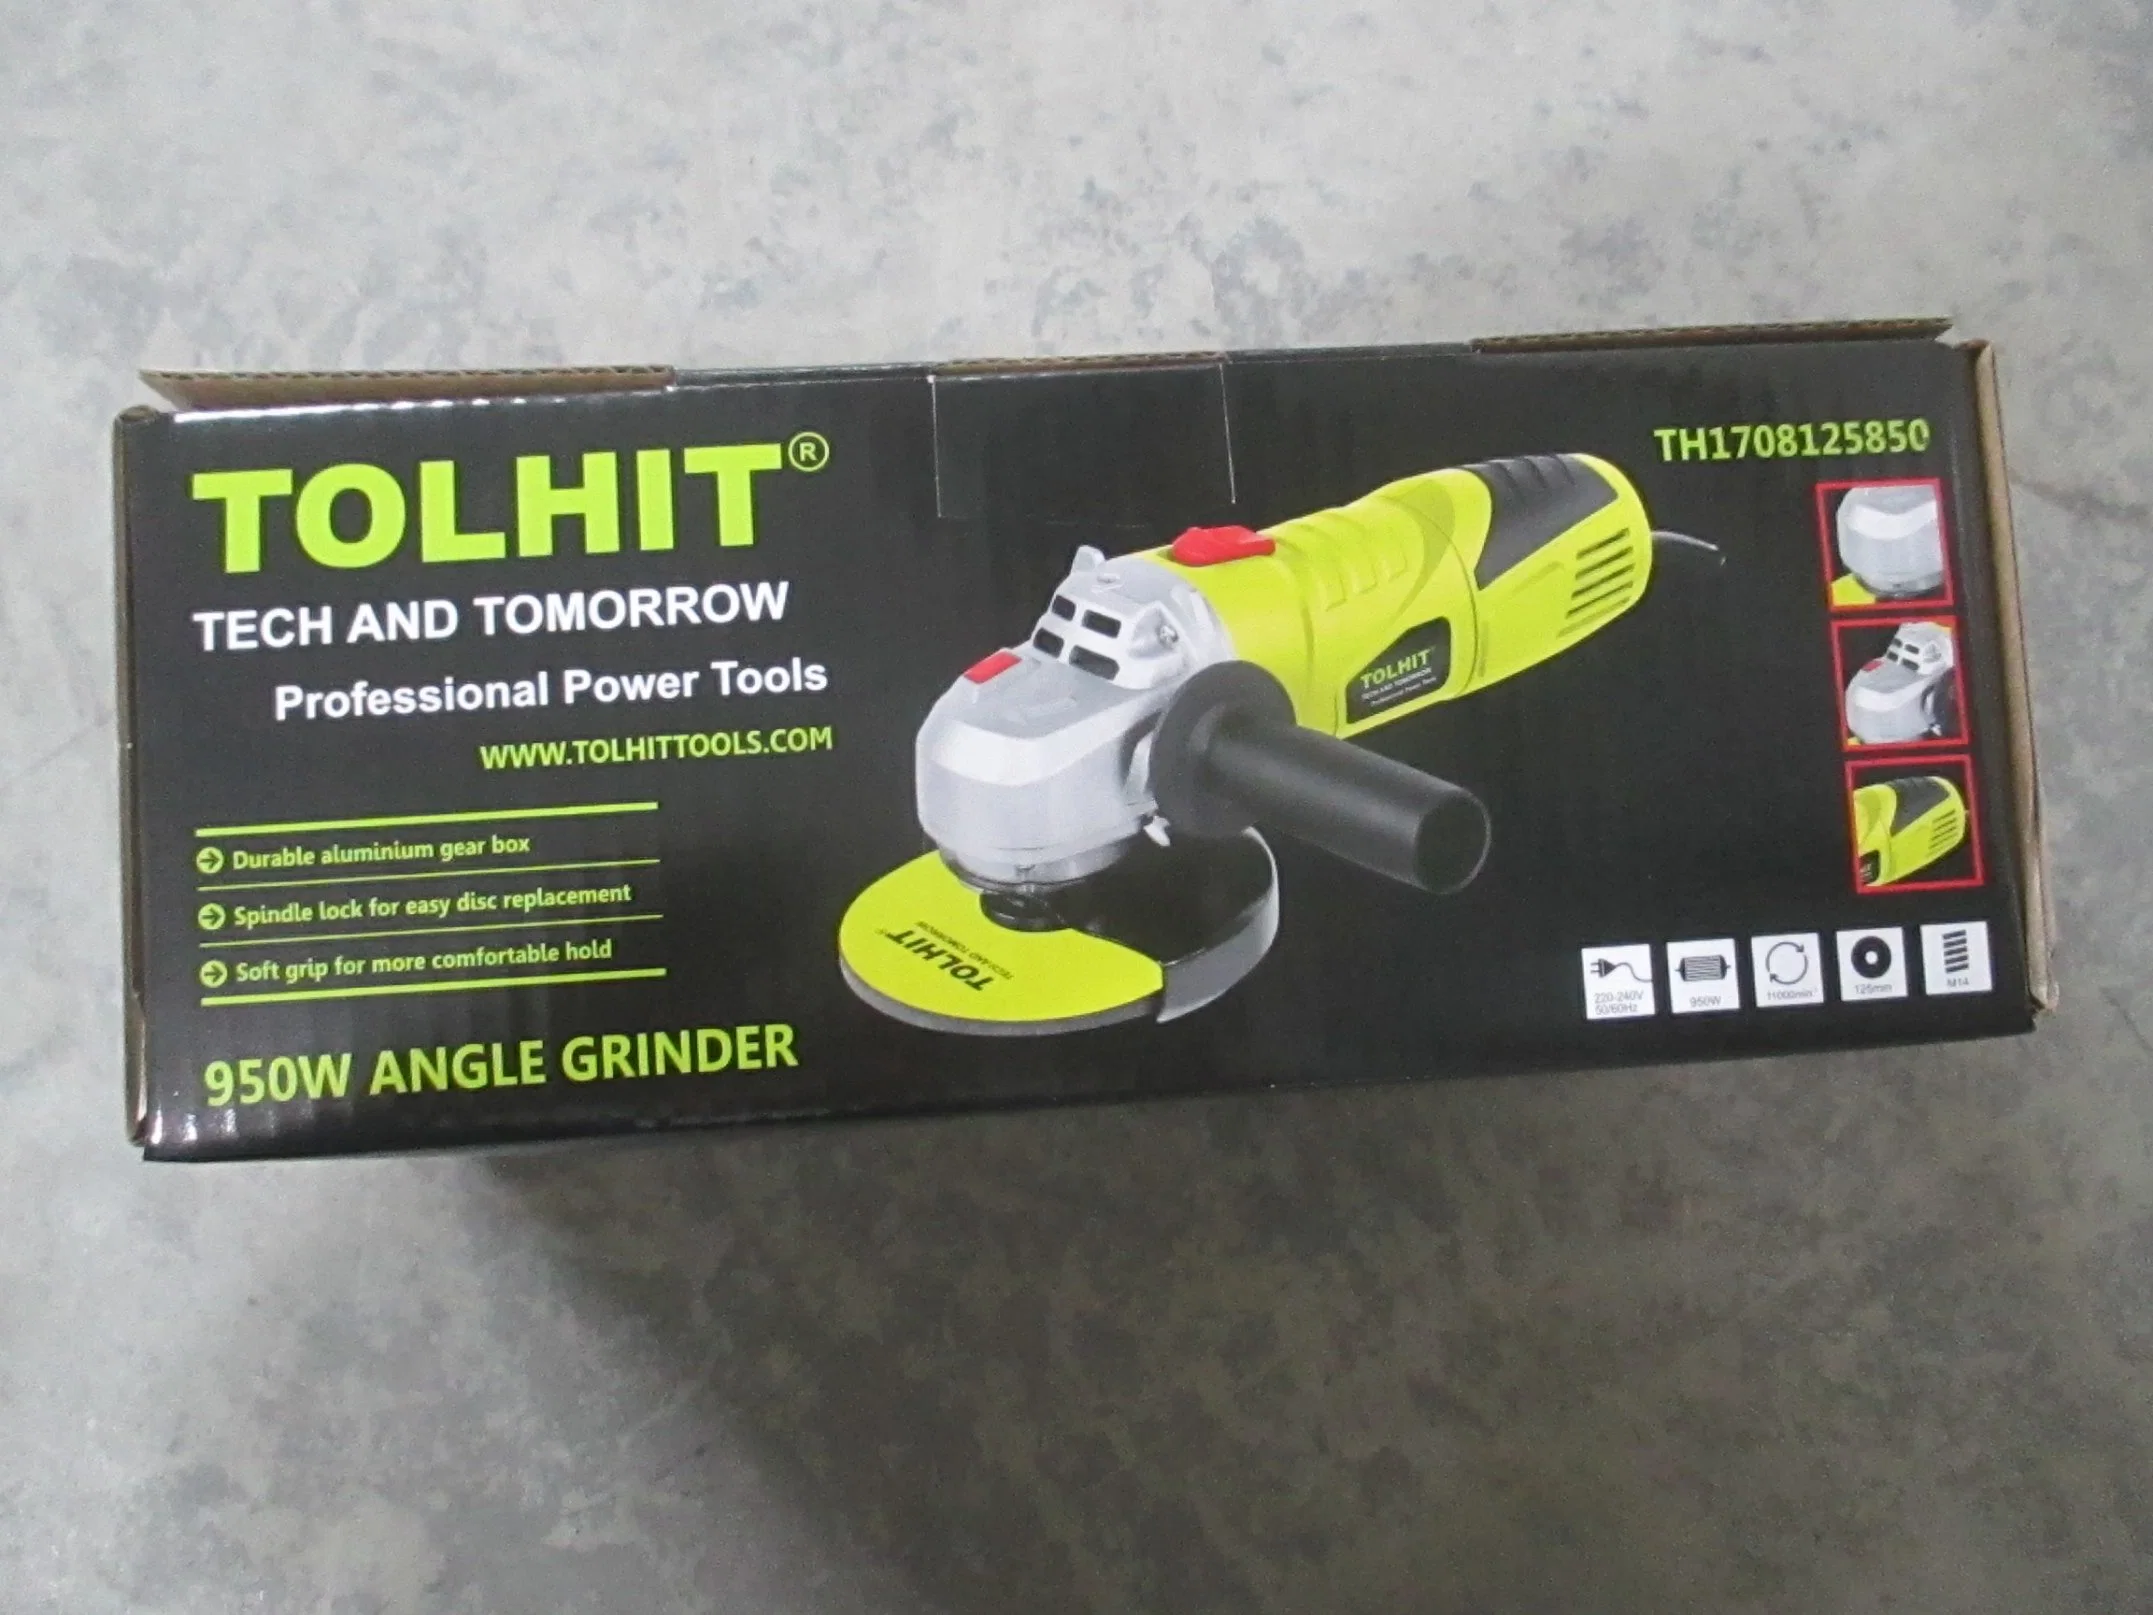 Tolhit Power Tools Factory 125mm Portable Electric Angle Grinder Accessories